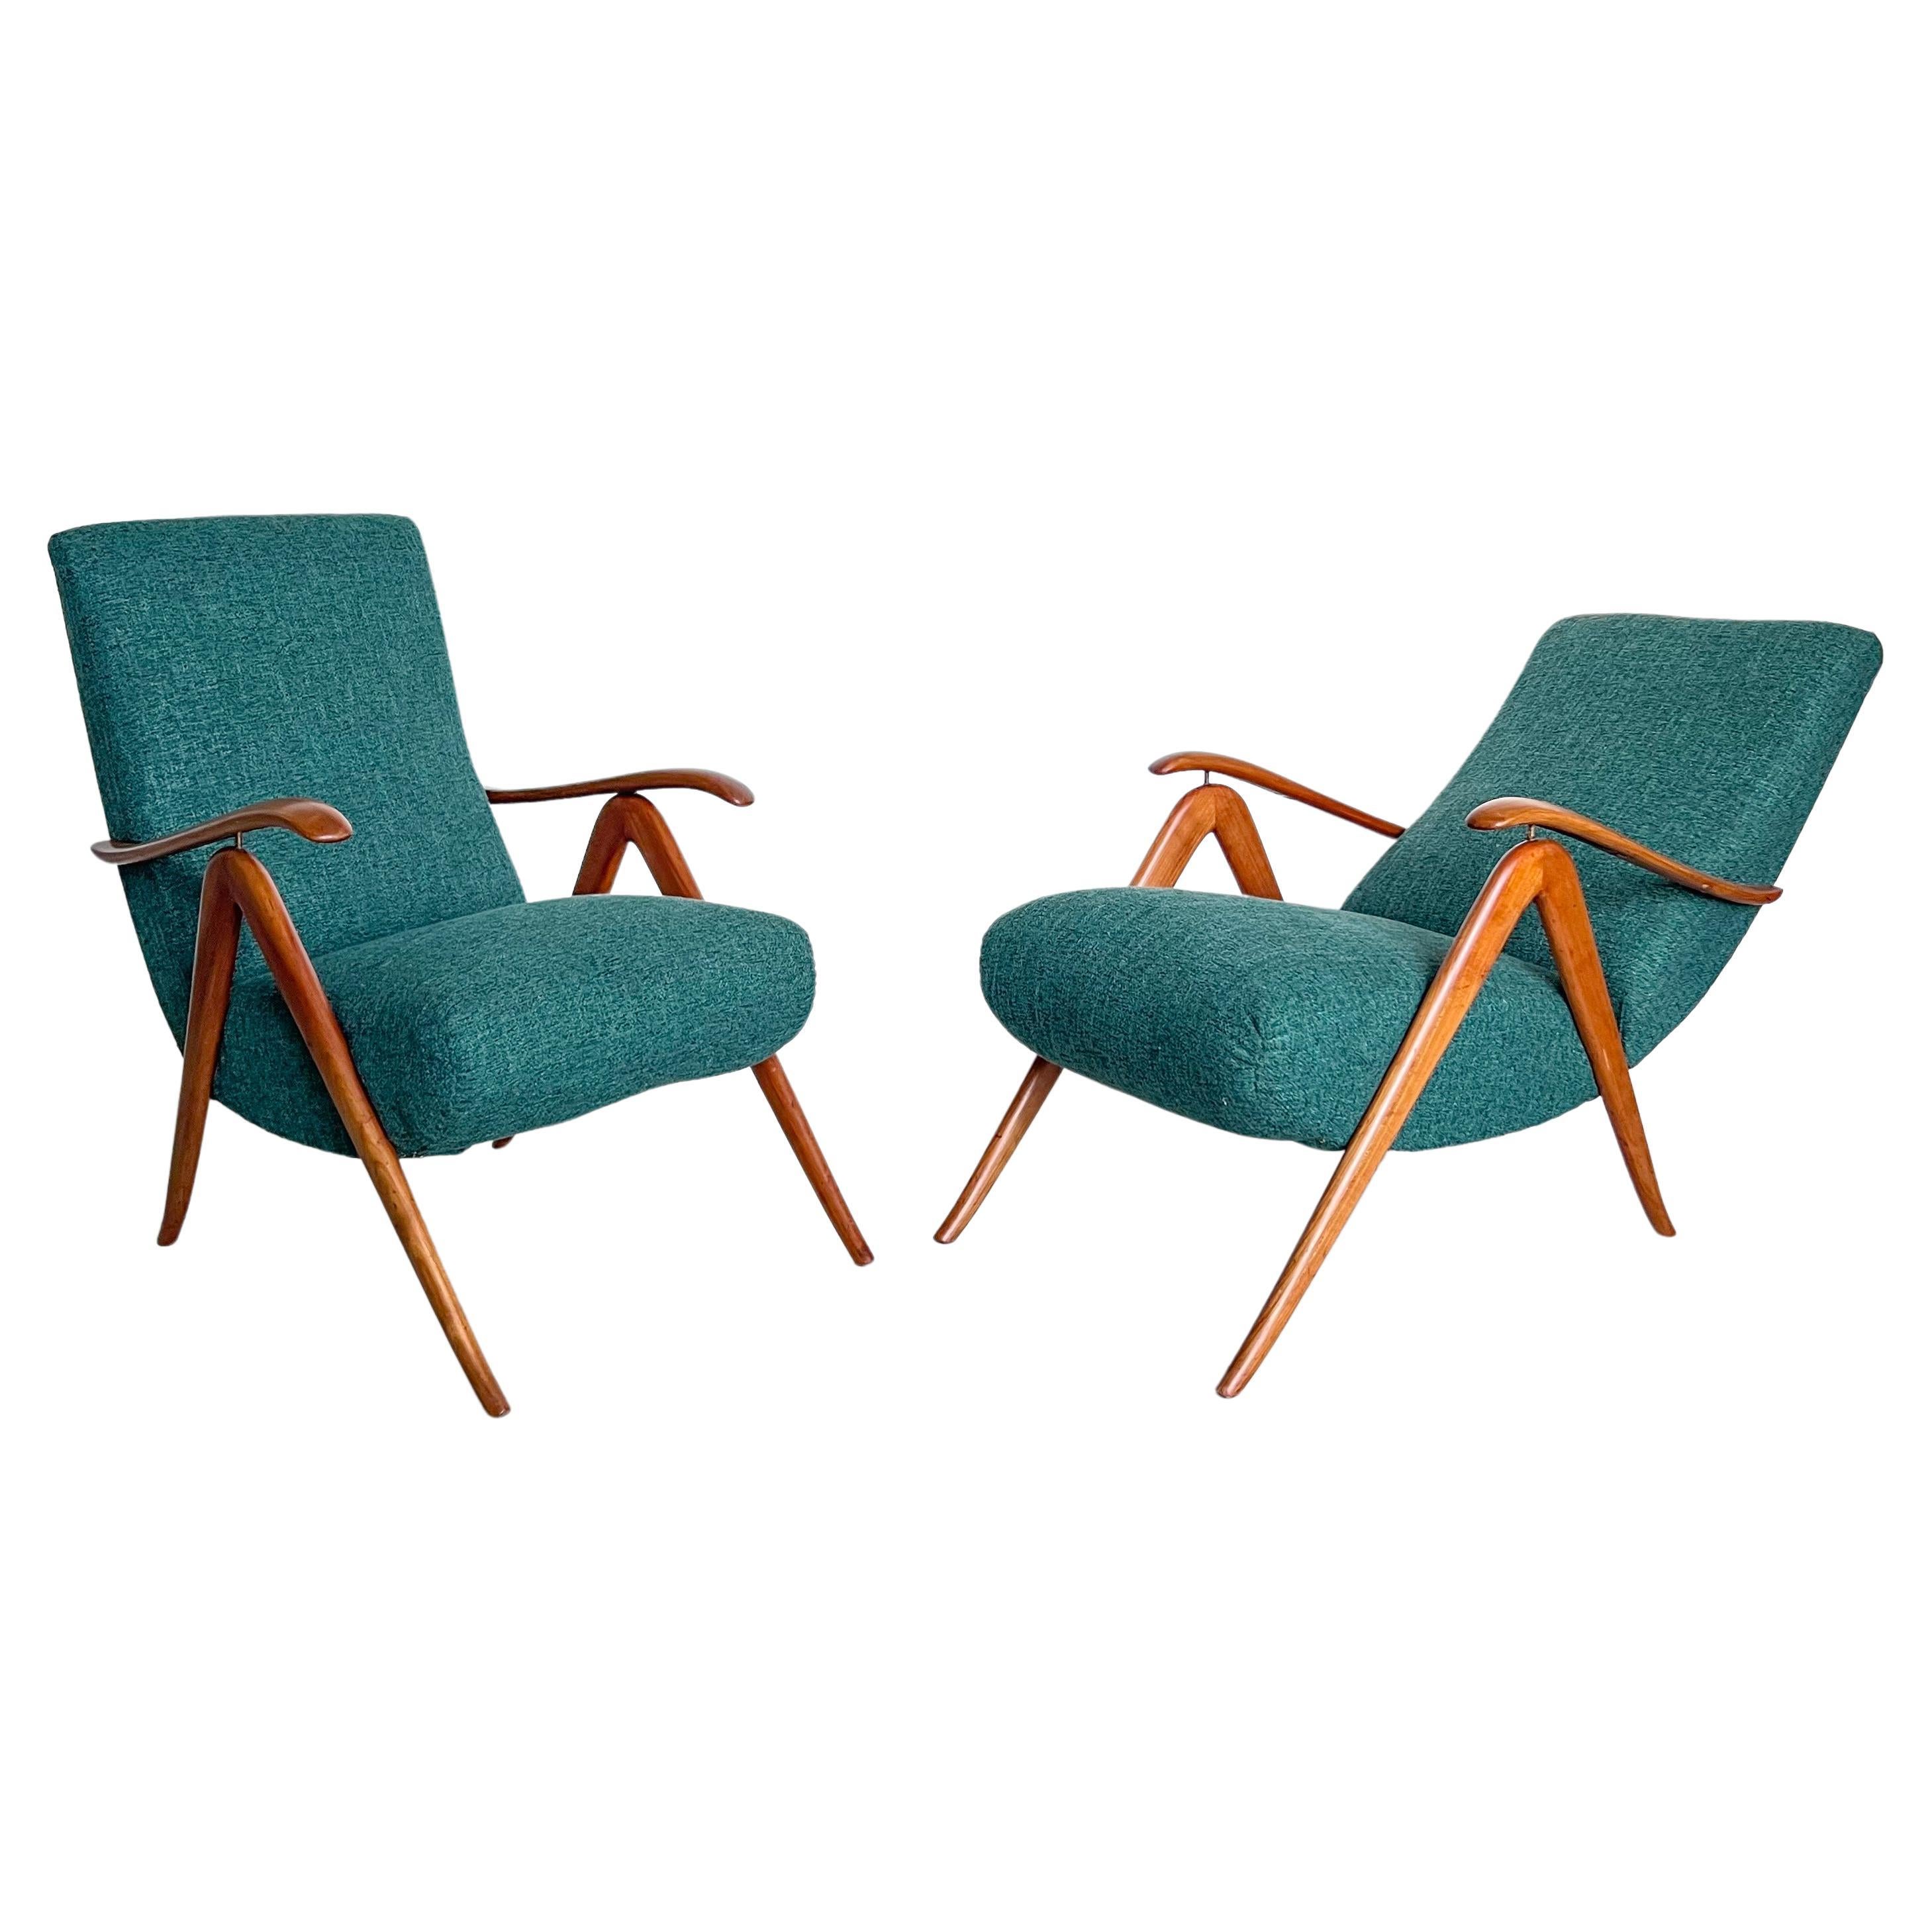 Elegant Mid-Century Modern Reclining Armchairs in Wood, Green, Timeless